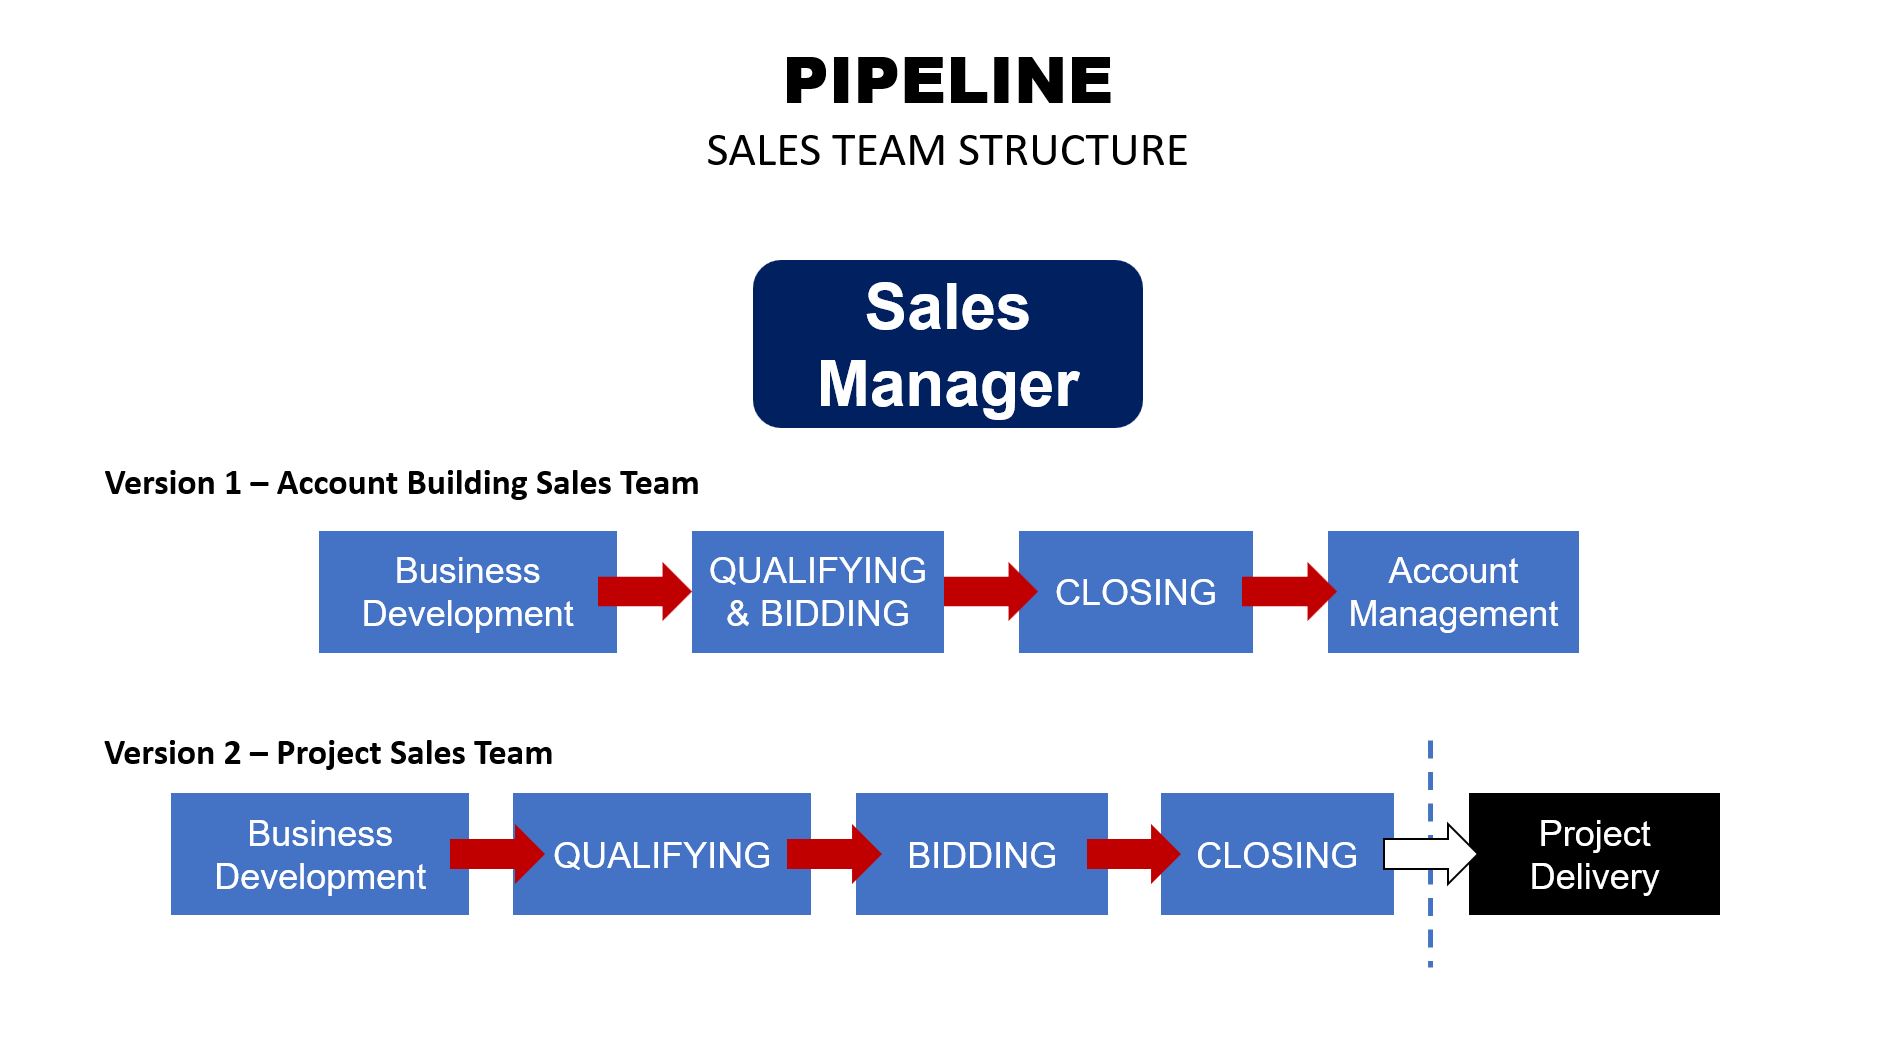 Pipeline Sales Structure